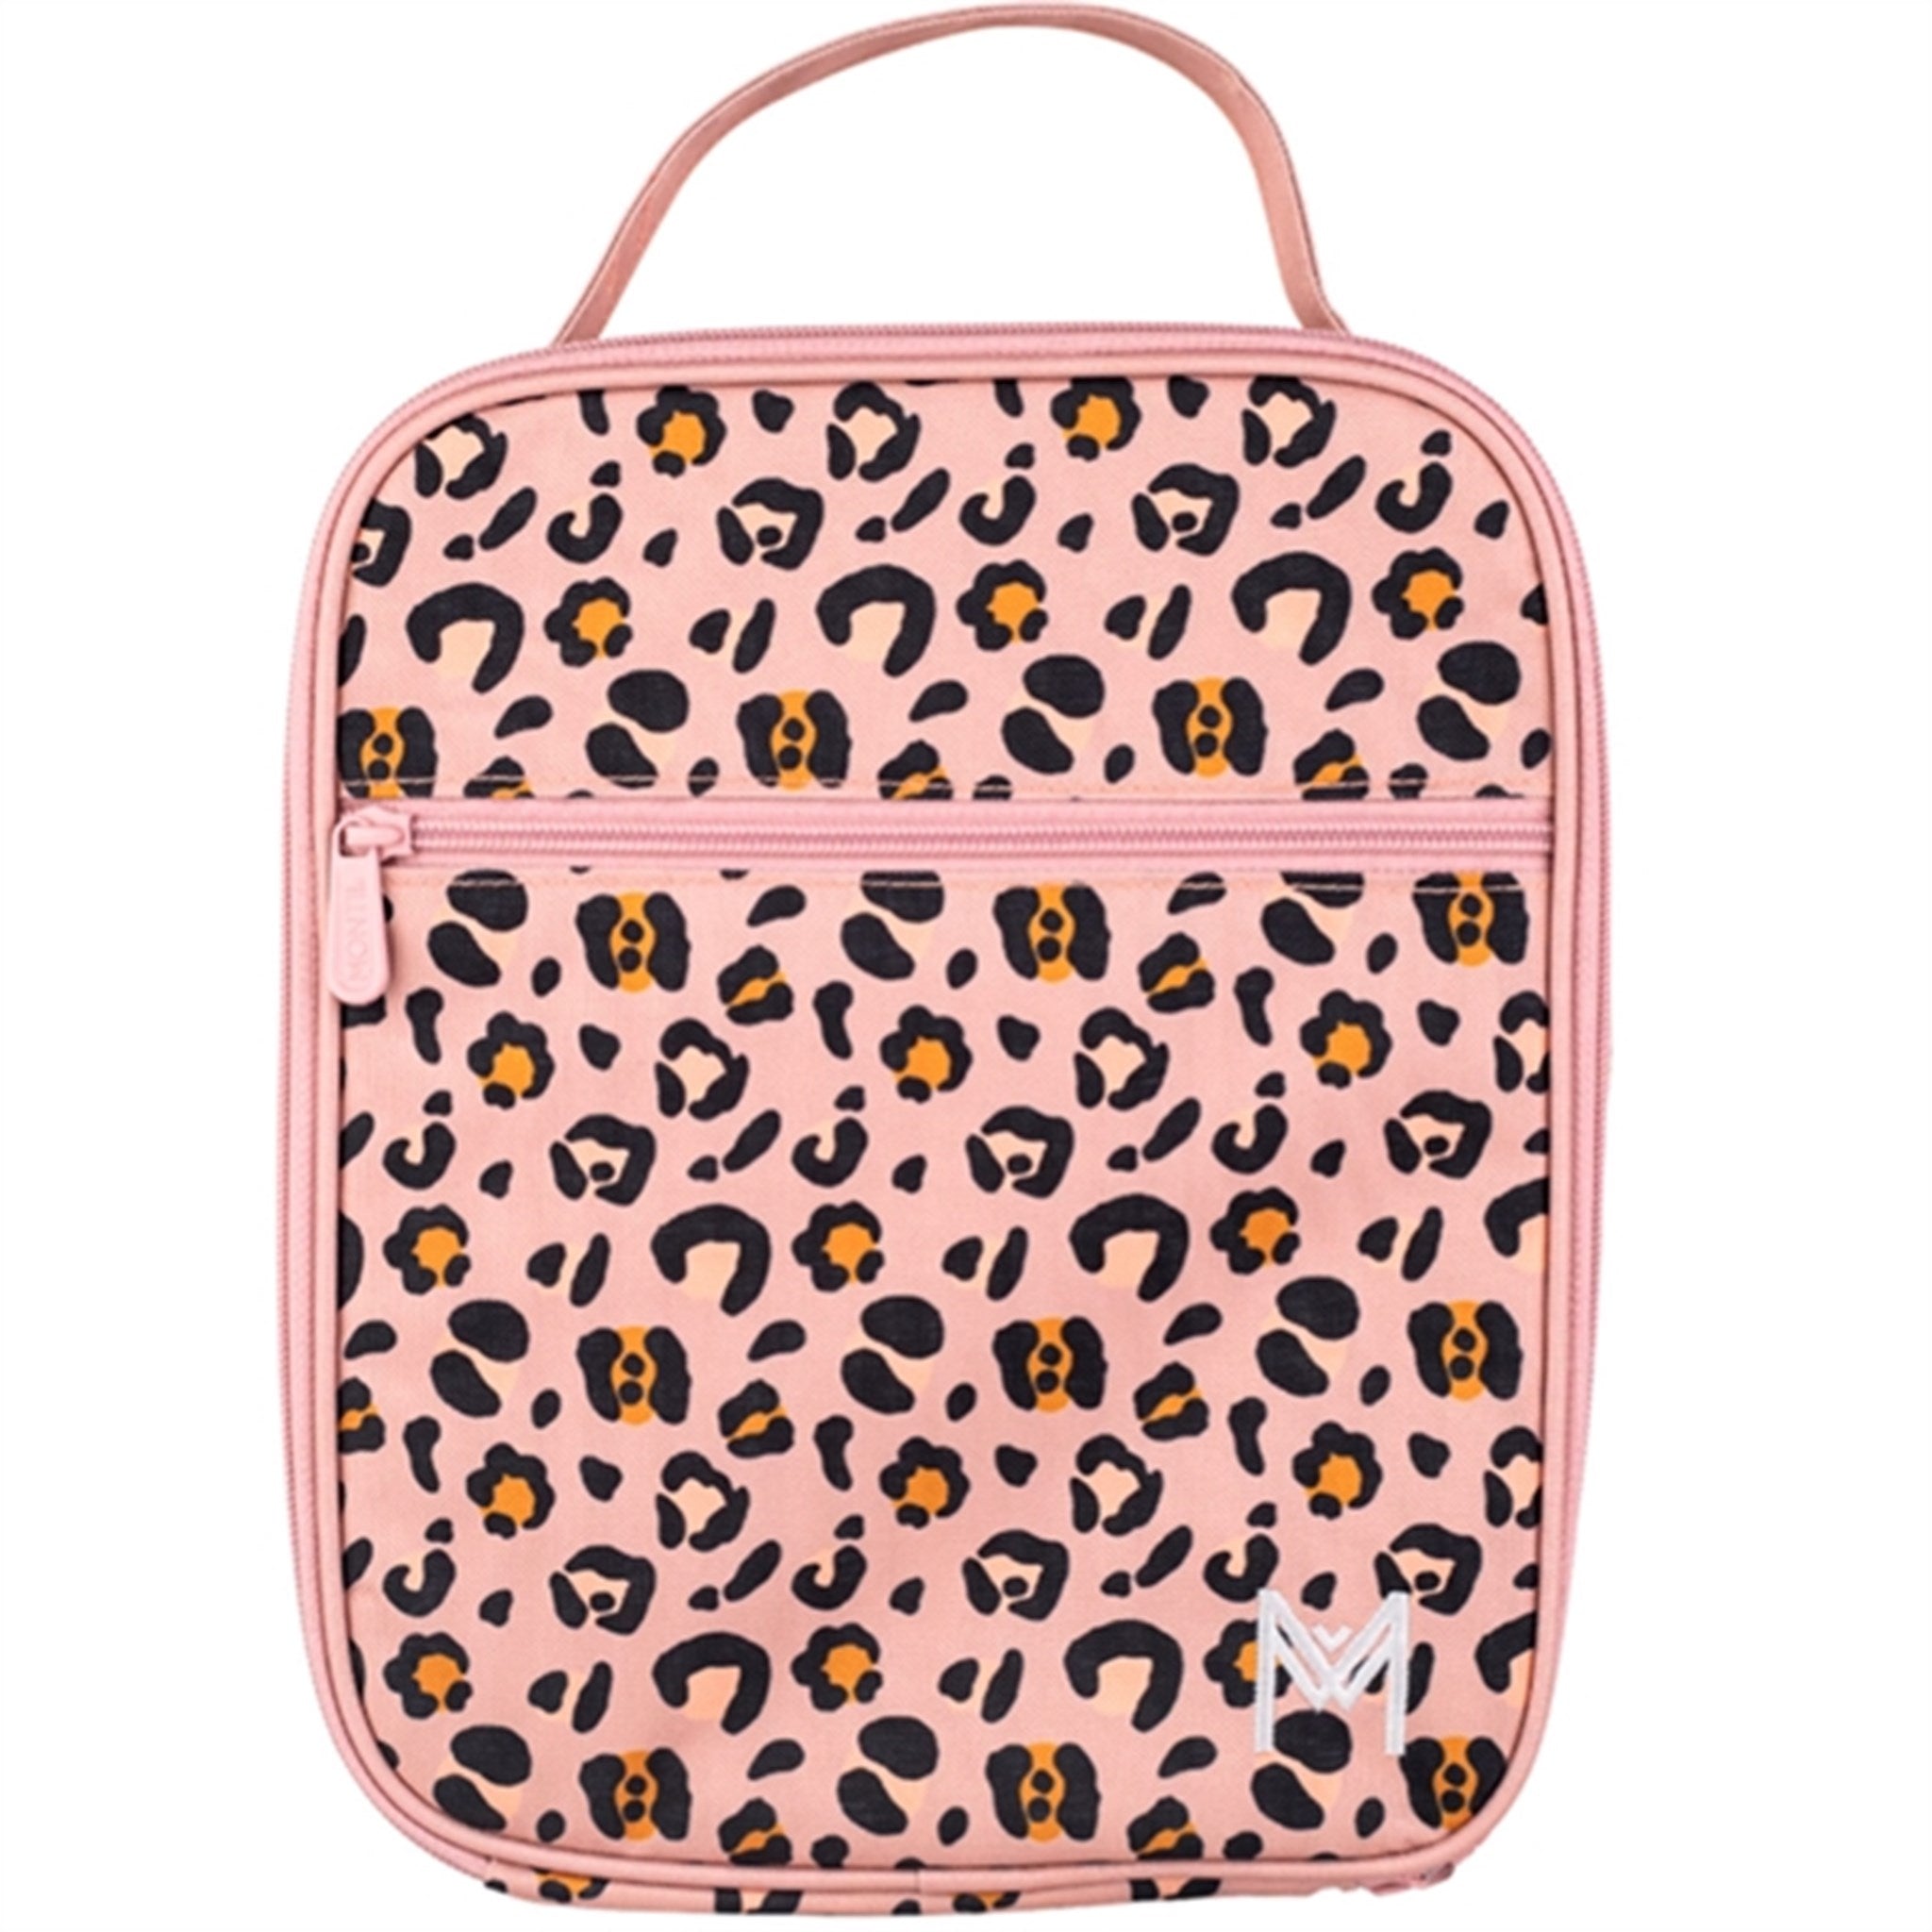 MontiiCo Lunch Bag Large Blossom Leopard